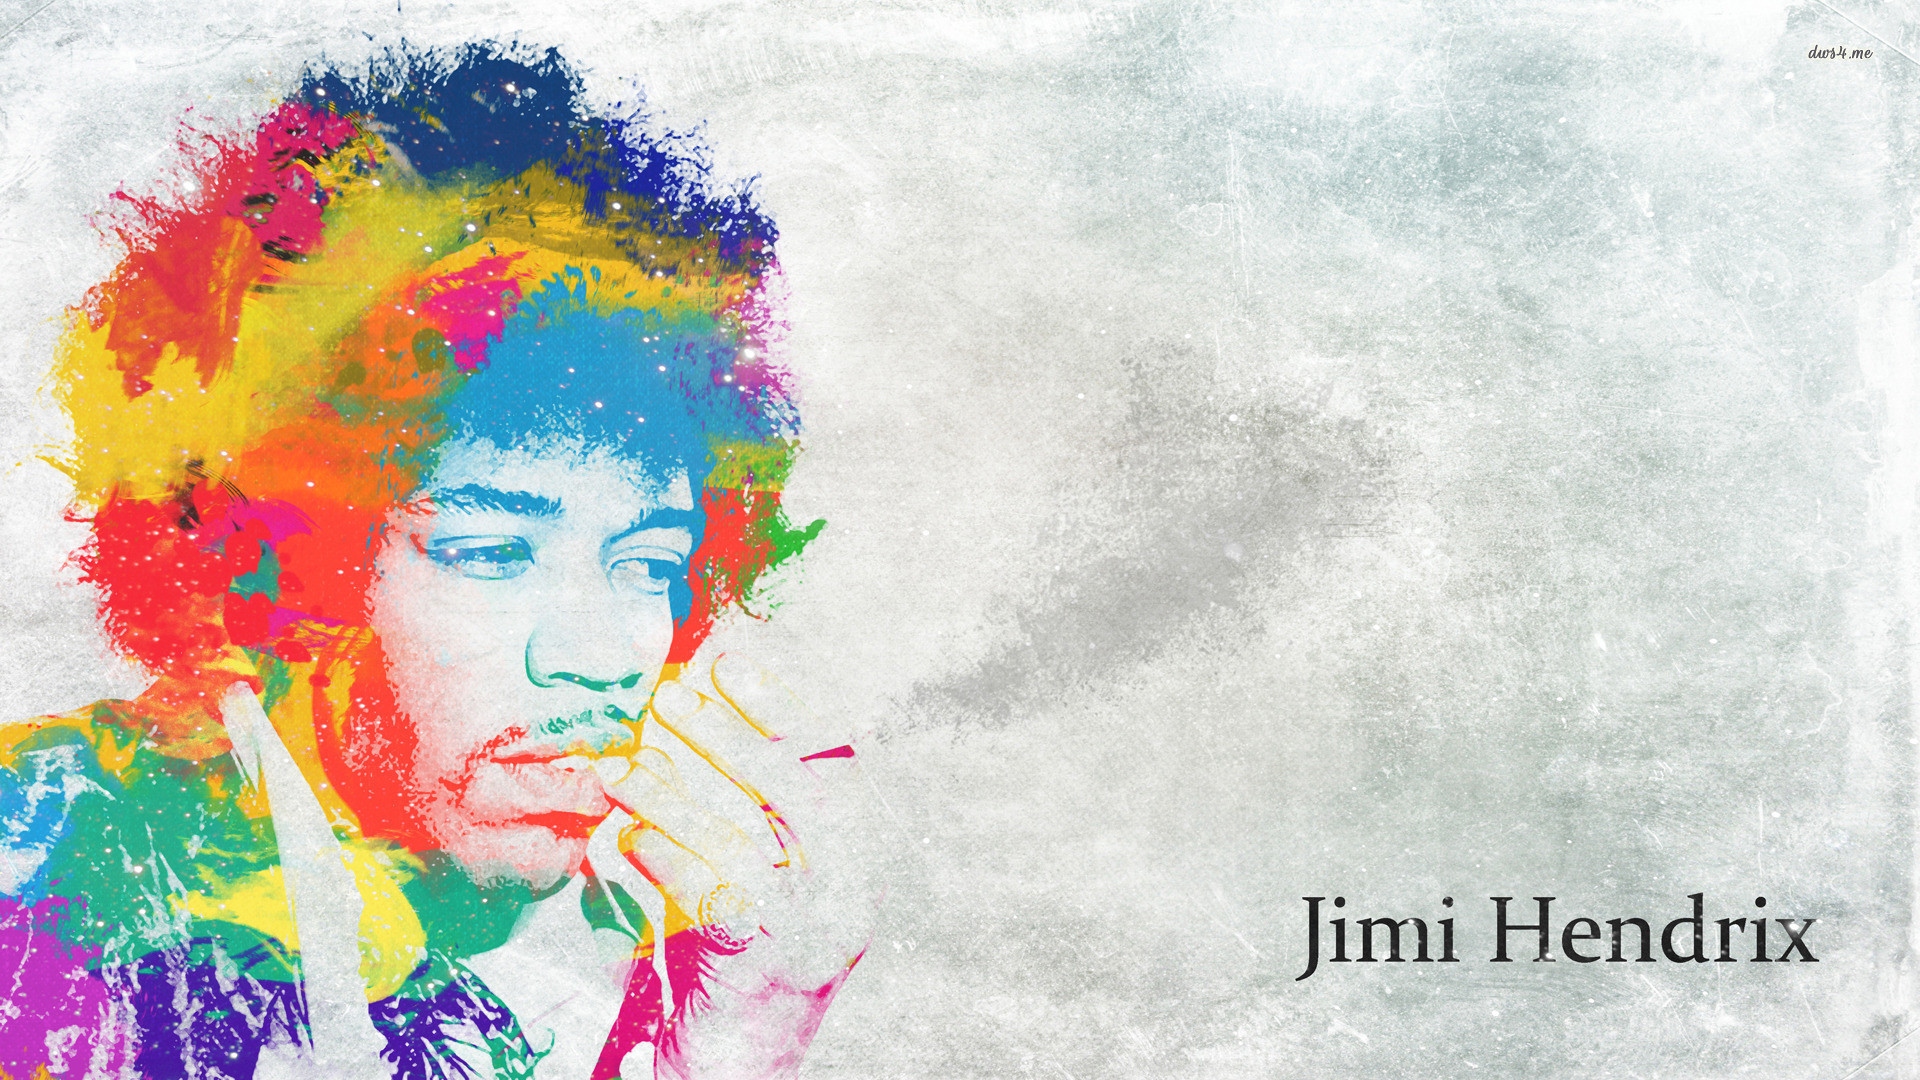 1920x1080 Jimi Hendrix Wallpapers Images Photos Pictures Backgrounds 1920Ã1080 Jimi  Hendrix Wallpapers (36 Wallpapers